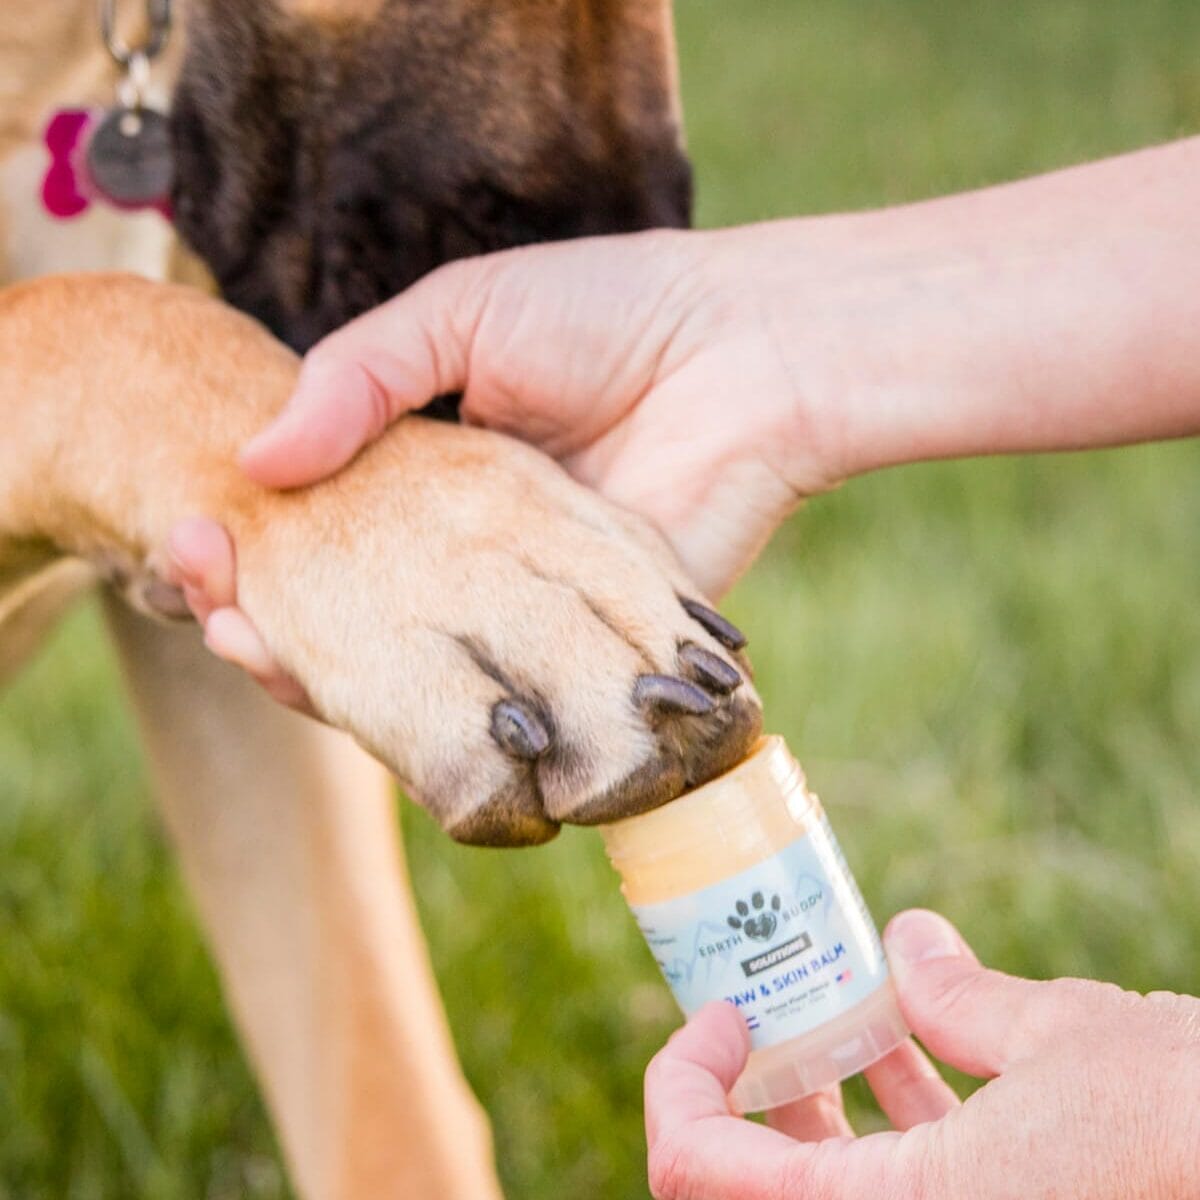 Great Dane having Earth Buddy’s Paw & Skin balm applied to her paws. CBD balms for dogs provides targeted relief from cracked paws or skin irritation.